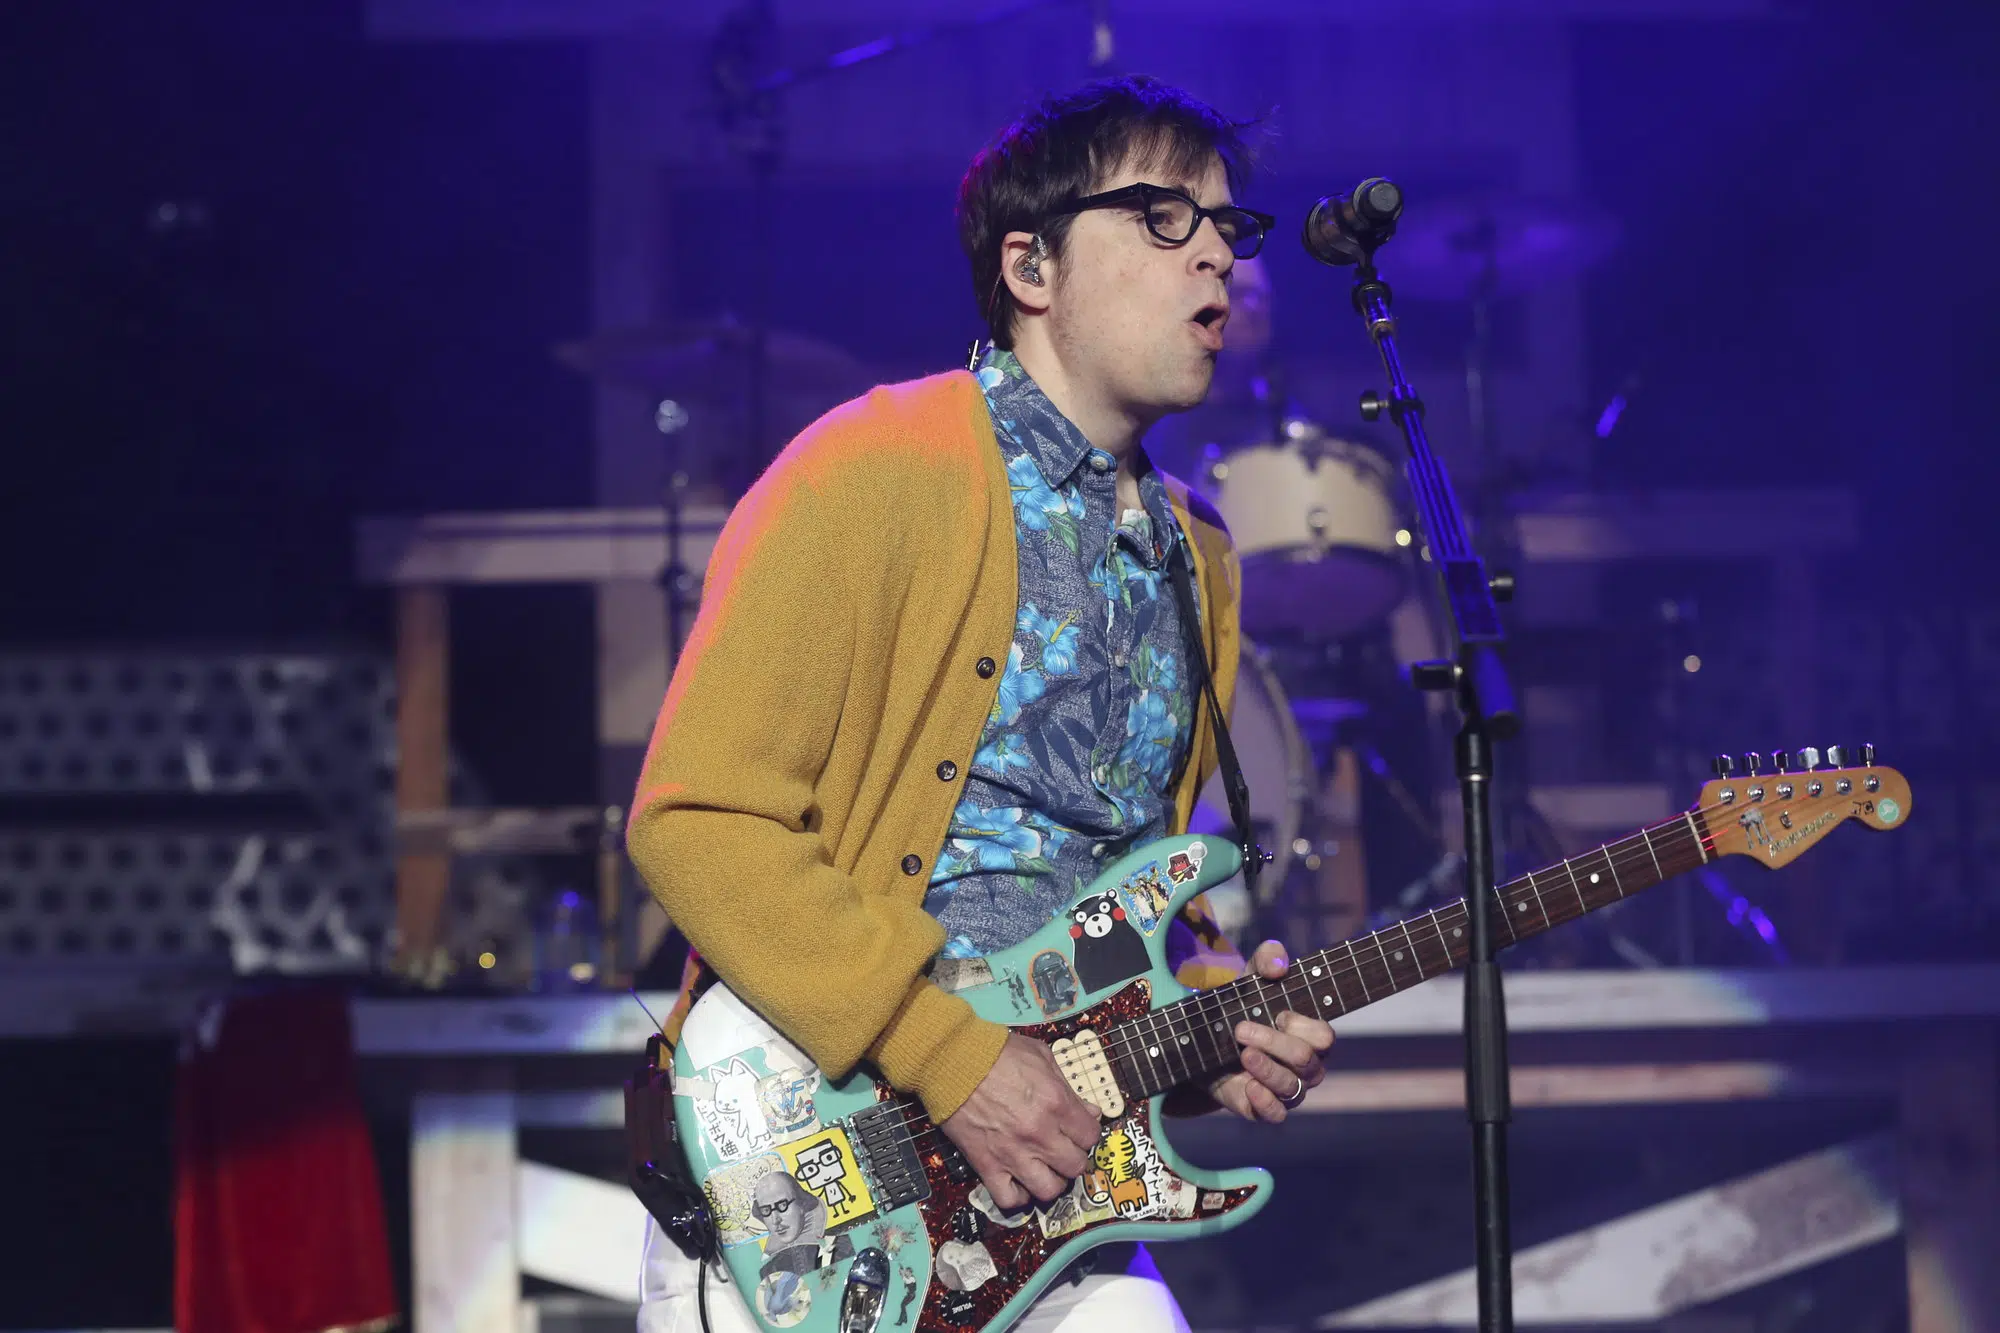 Rivers Cuomo style